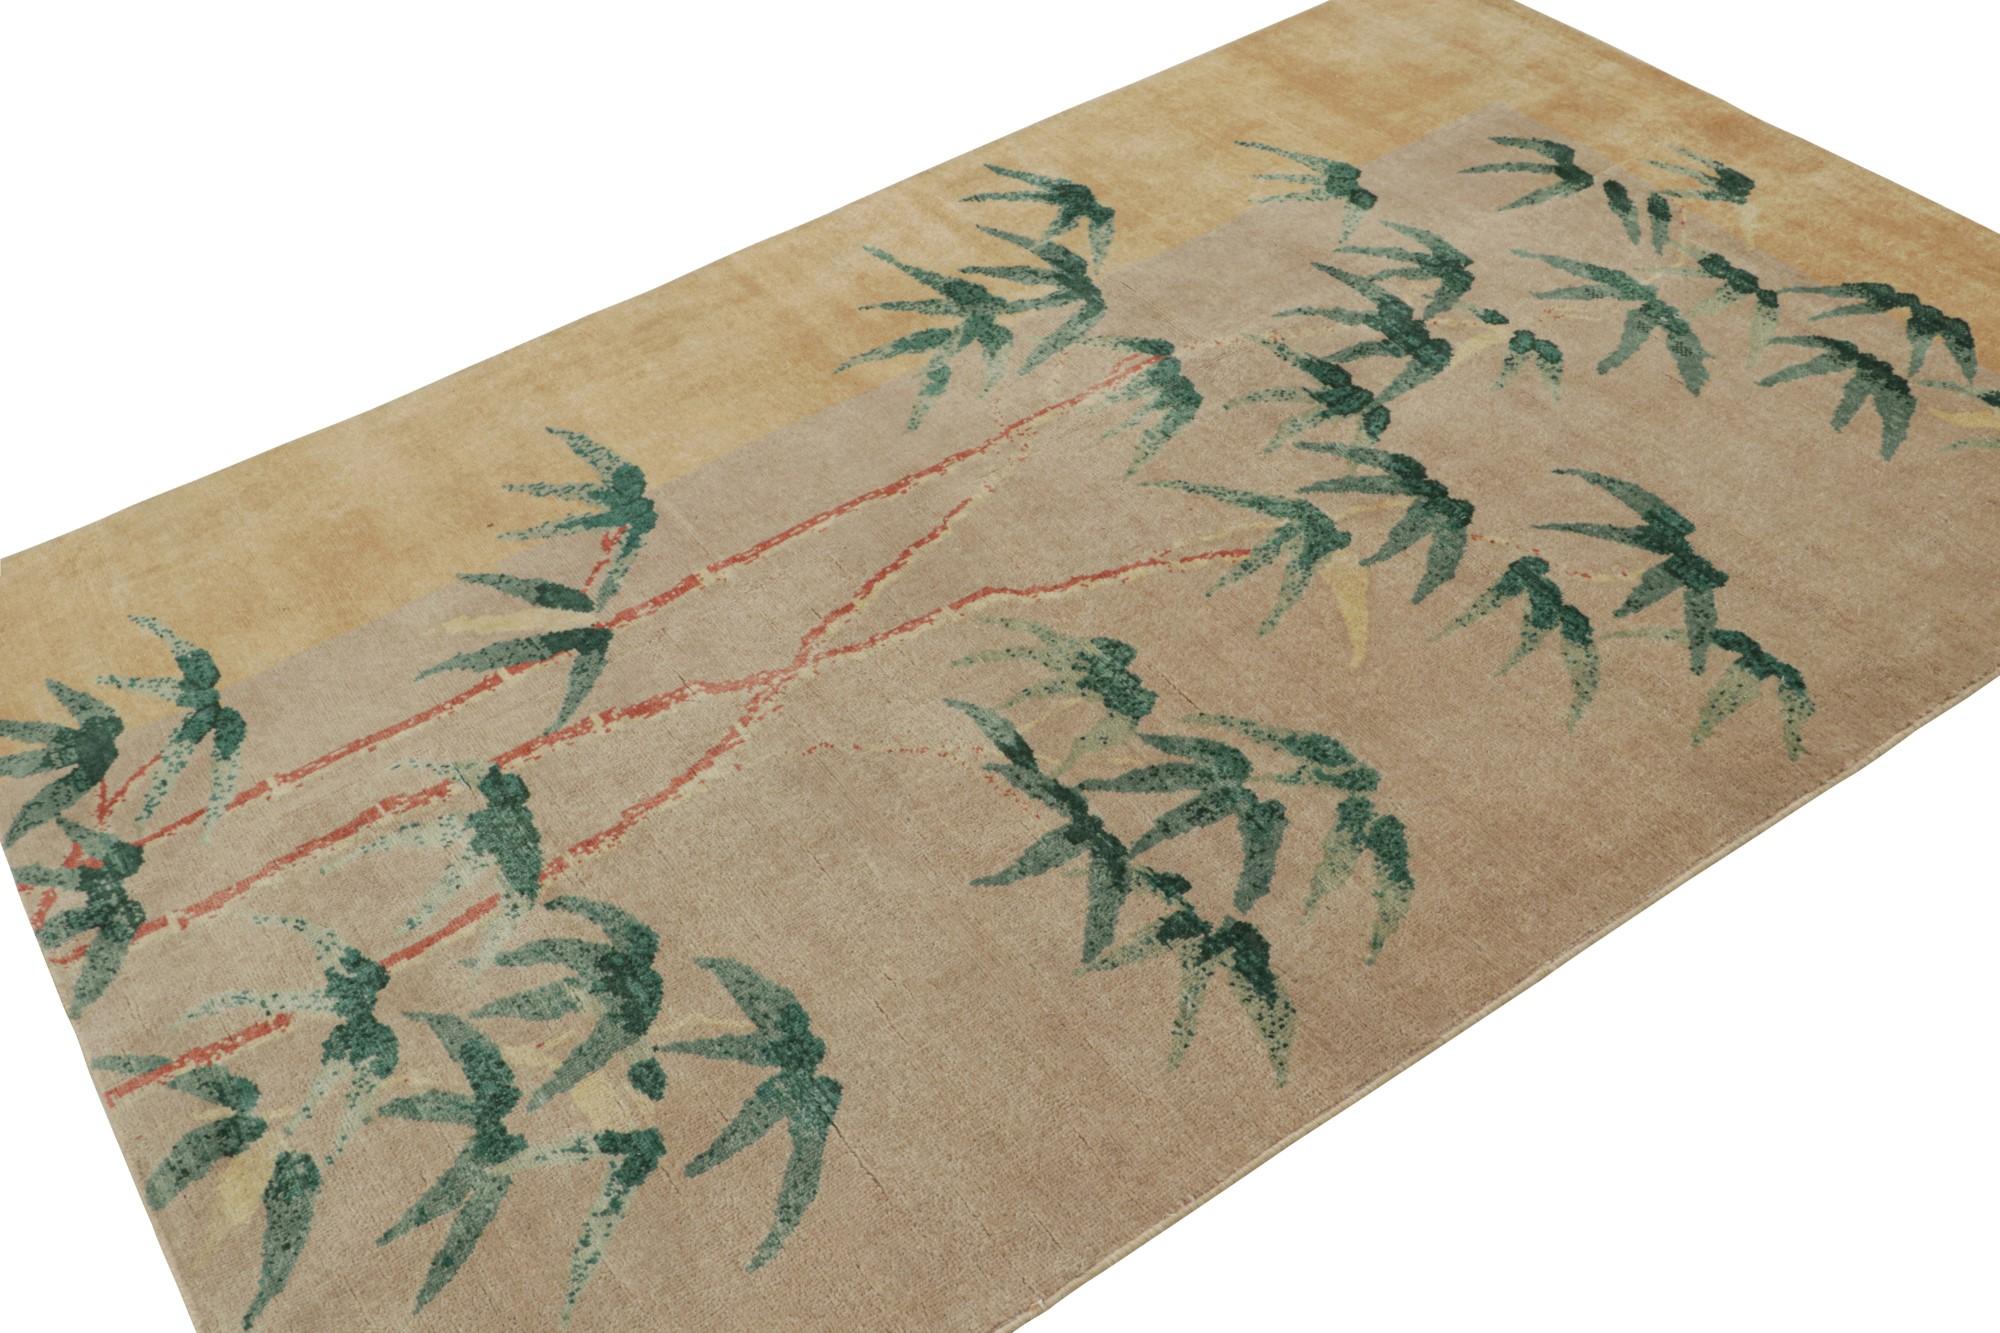 Hand-knotted in wool, this 5x8 rug has been inspired by the Chinese Deco style. Featuring floral patterns showcasing bamboo trees, this piece is a collectible period piece. 

On the Design:  

Hand-knotted in wool, this contemporary piece recaptures